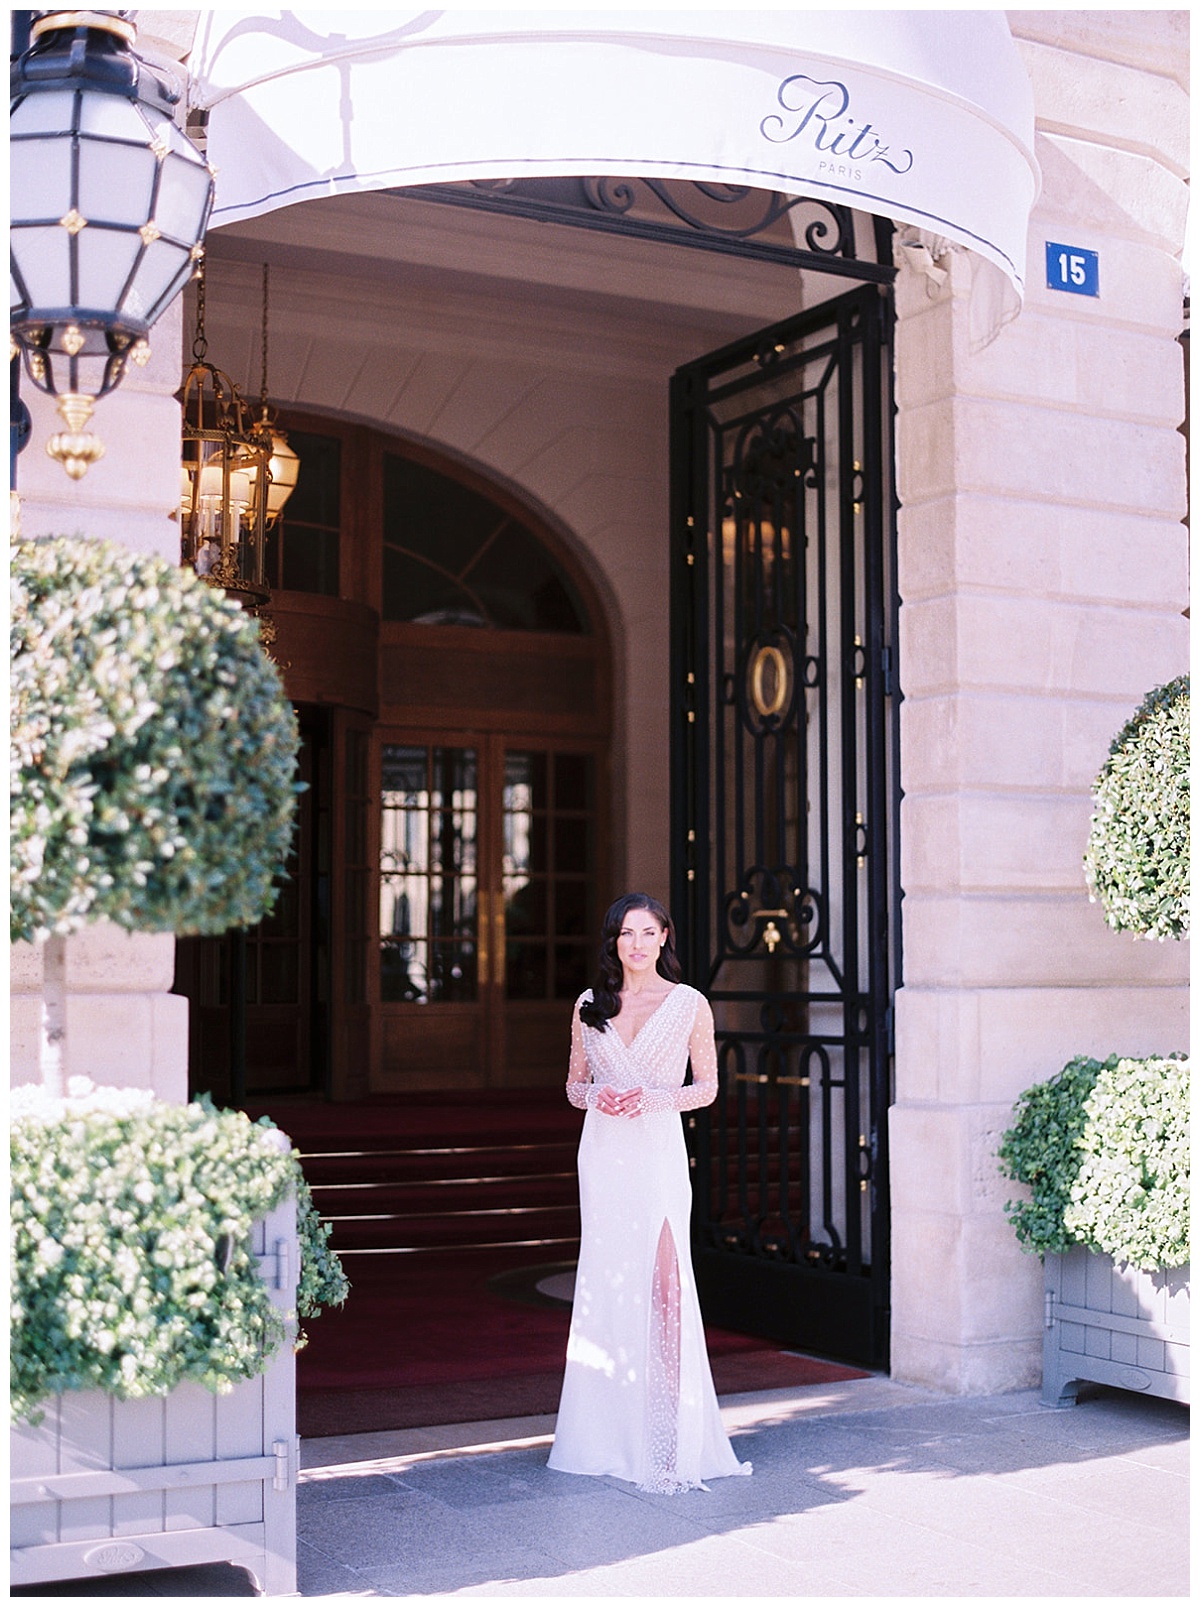 the bride in front of the ritz 